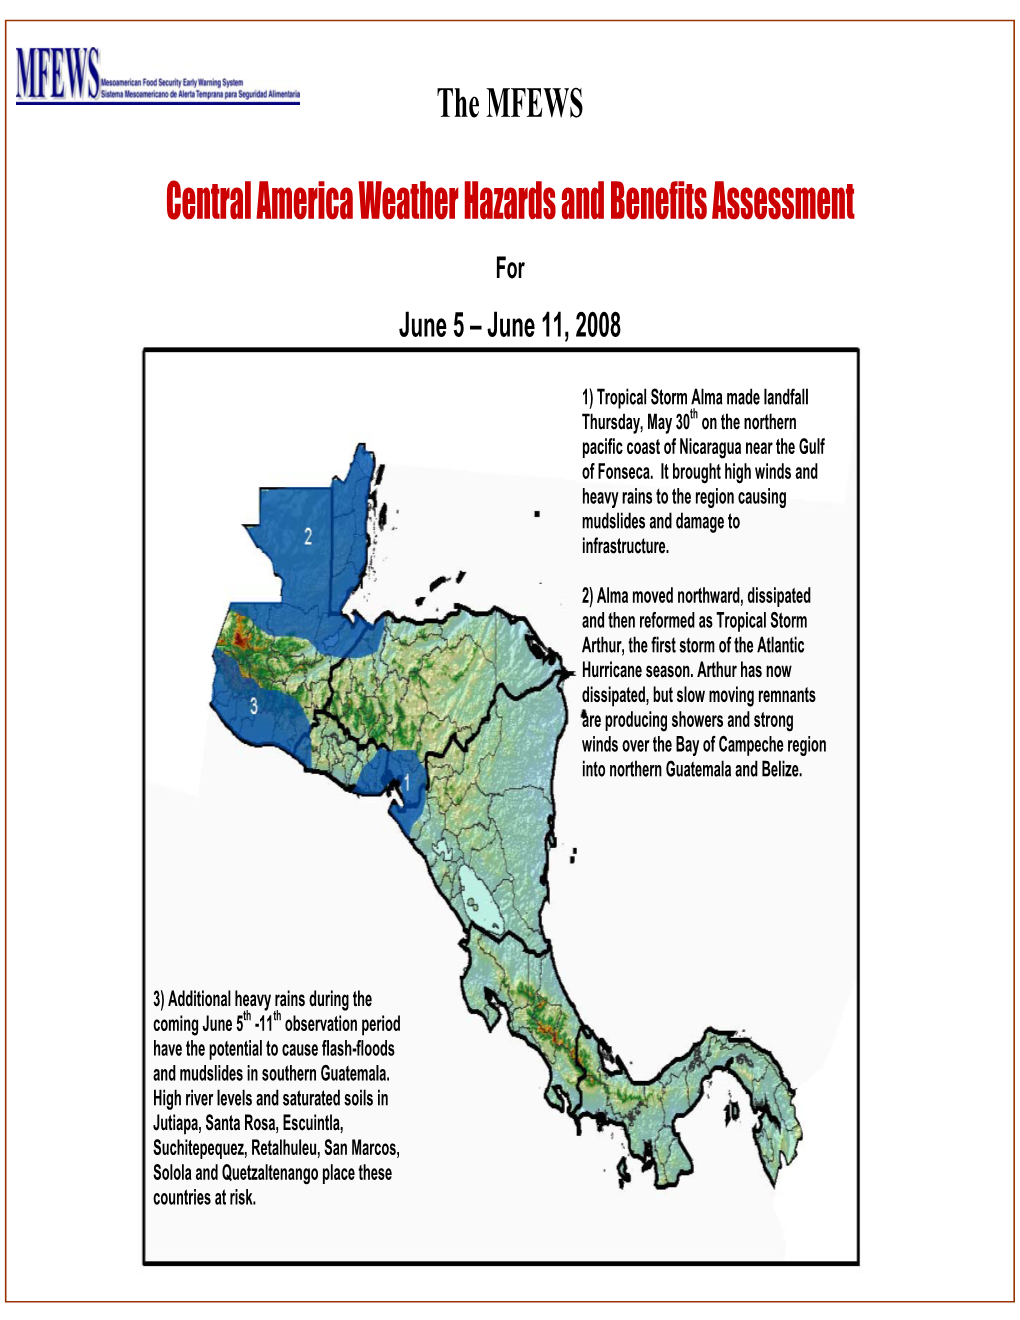 Central America Weather Hazards and Benefits Assessment